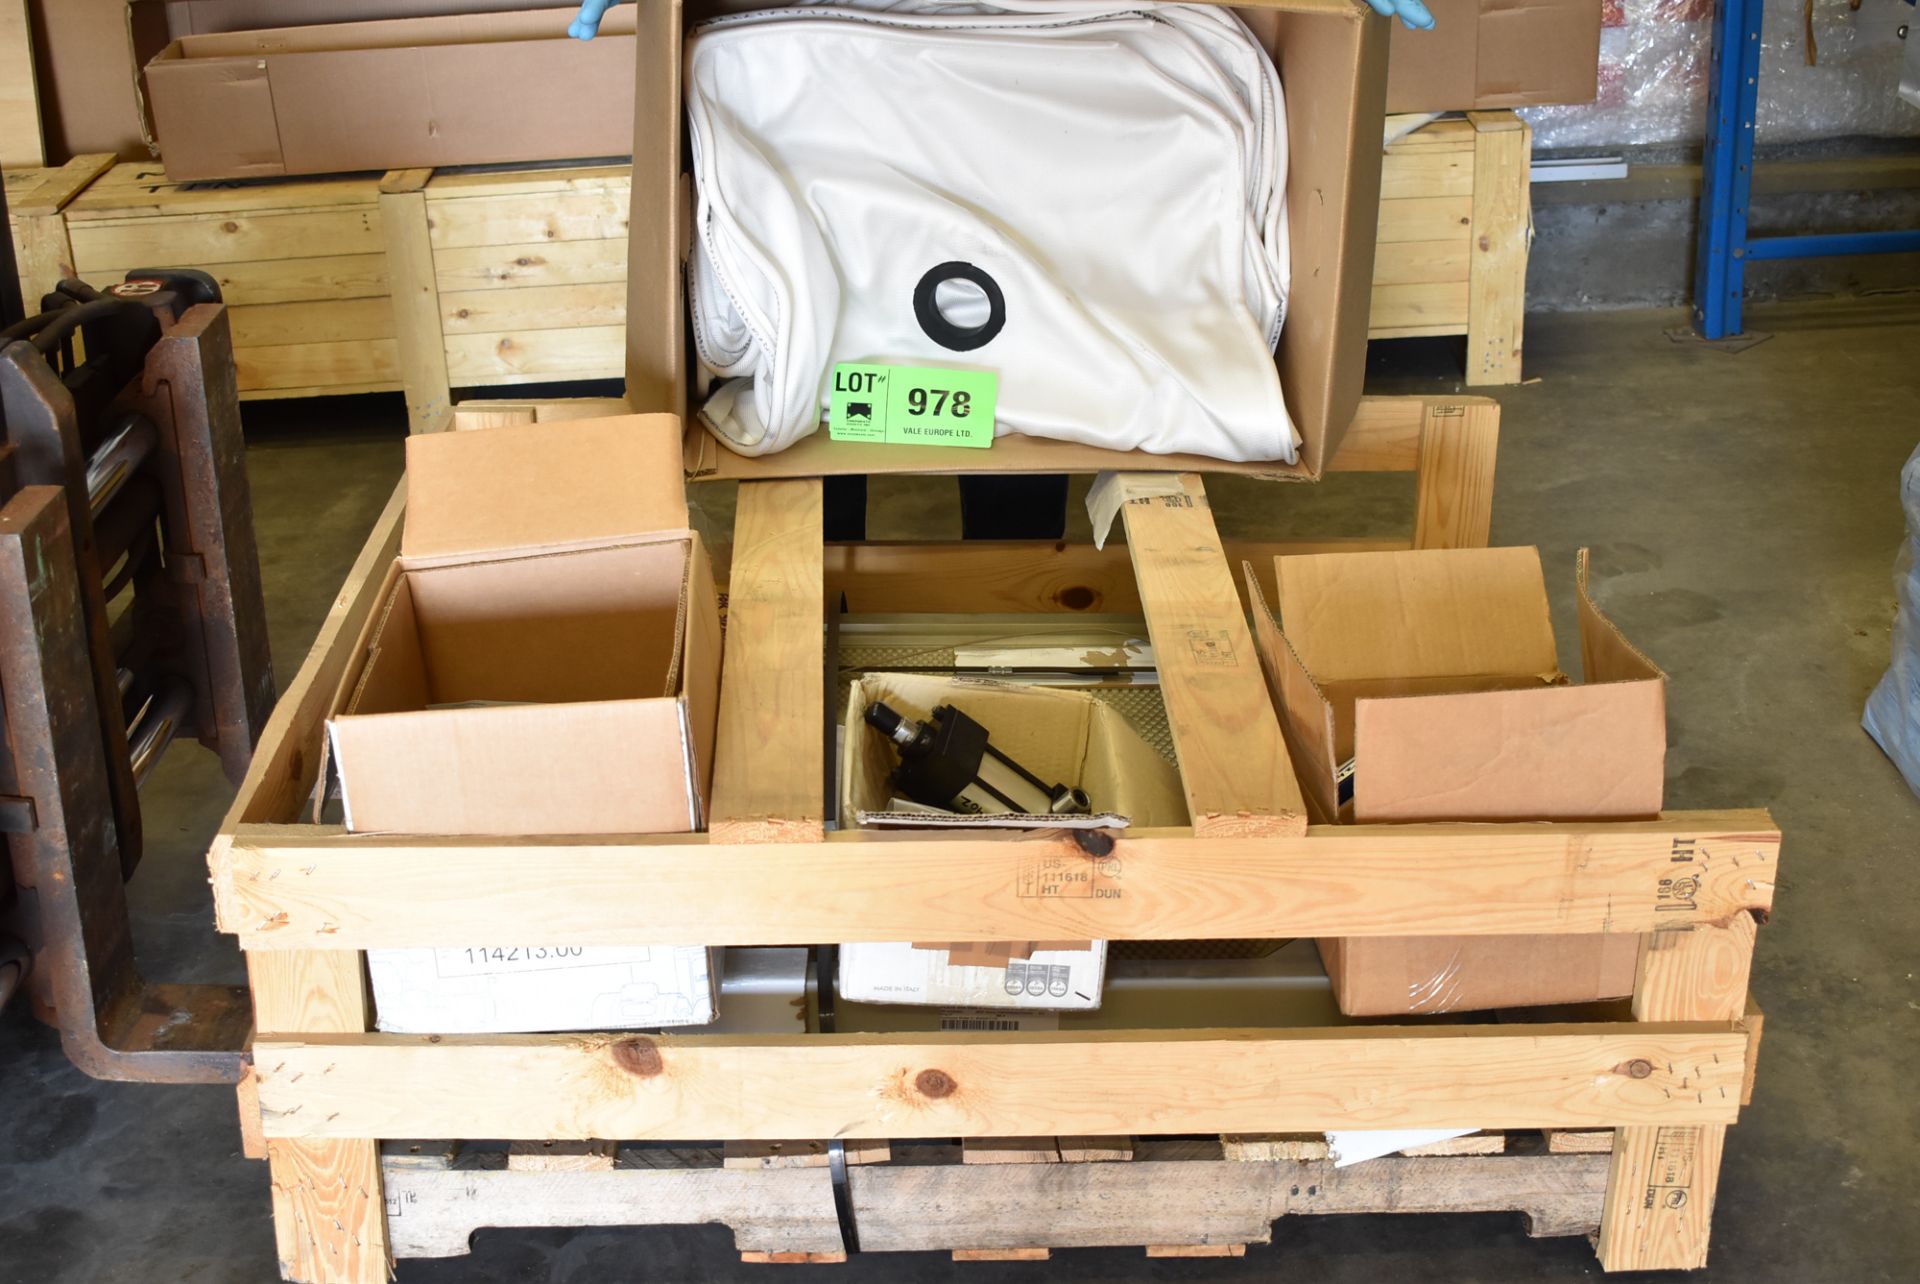 LOT/ SIEMENS FILTER PRESS SPARE PARTS (CI) (STORES BAY 3) [RIGGING FEES FOR LOT #978 - £50 PLUS